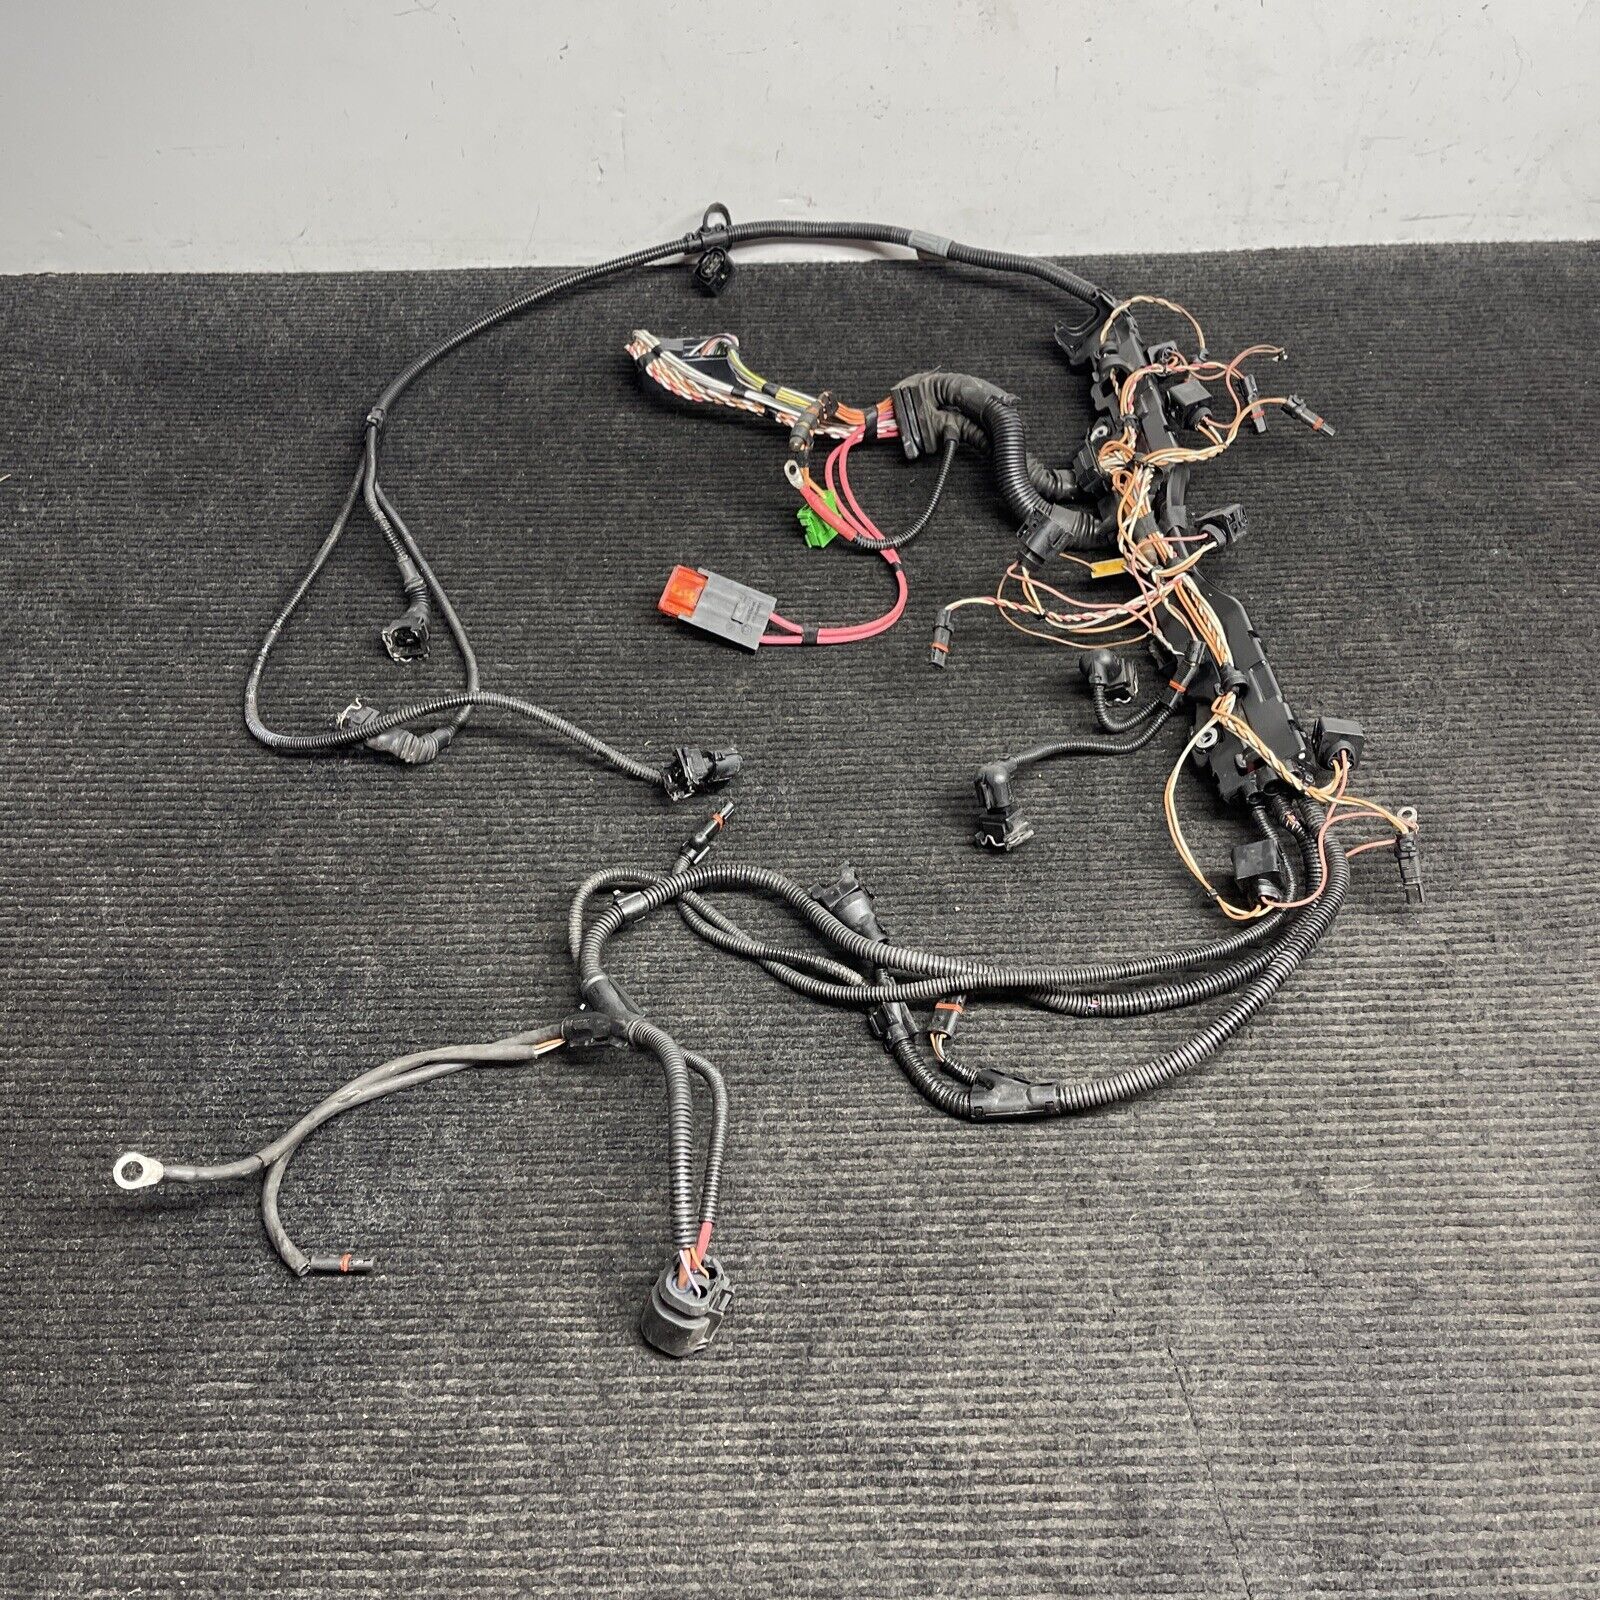 ☑️ 07-10 BMW E88 E90 E92 135 335 N54 Engine Ignition Wiring Harness Cable OEM